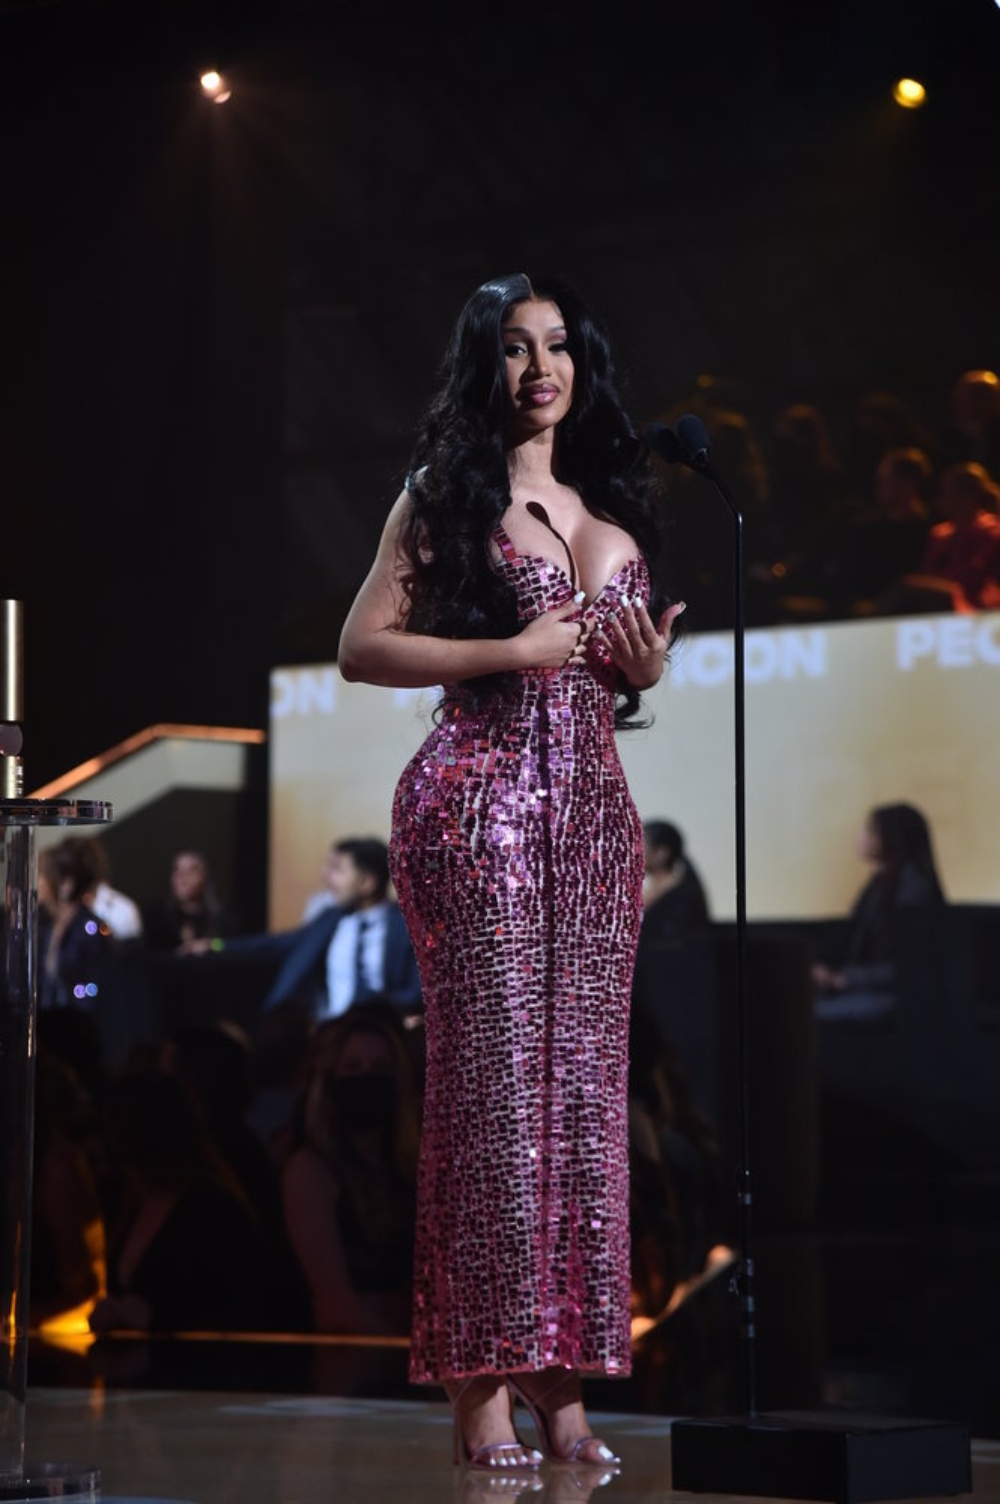 2021 PEOPLES CHOICE AWARDS Pictured Cardi B speaks on stage Photo by Alberto Rodriquez E Entertainment NBC Ovo je lista pobednika dodele nagrada 2021 PEOPLES CHOICE AWARDS